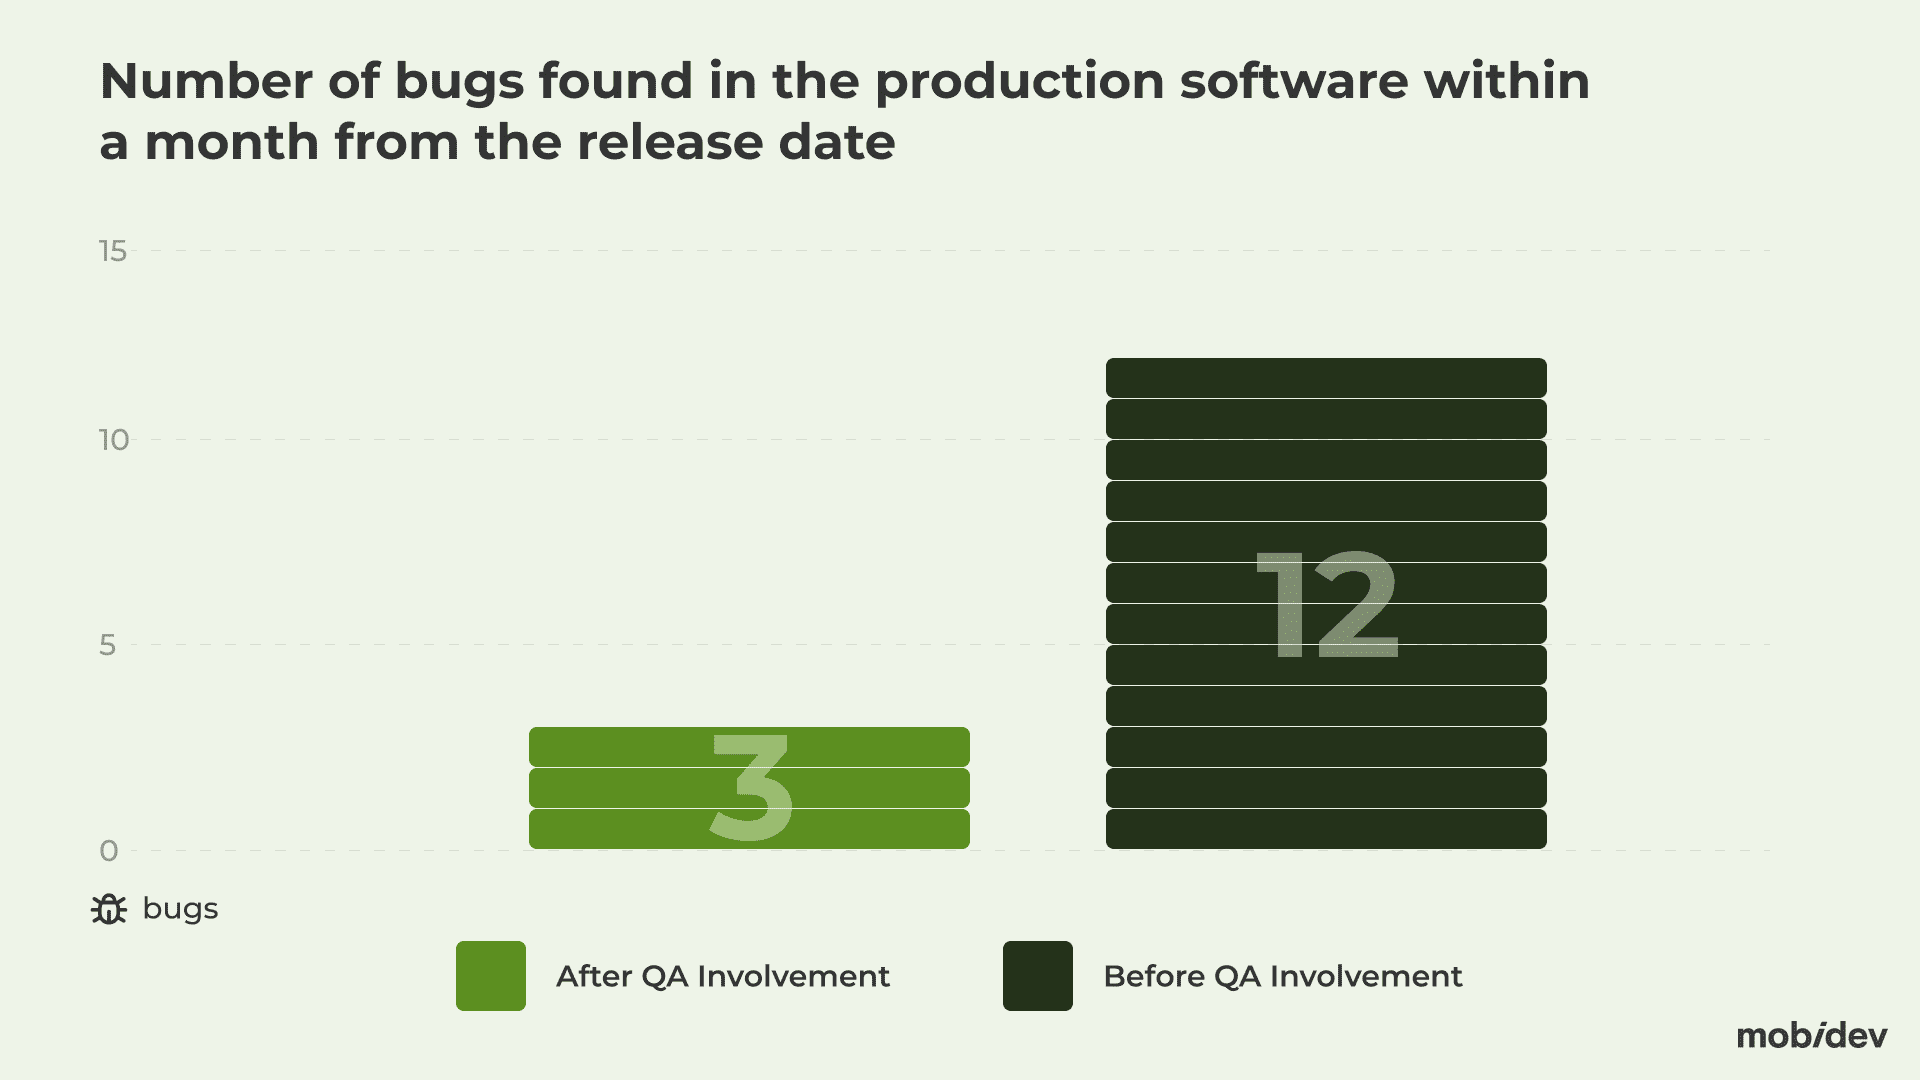 Bugs found in the production software before and after QA involvement